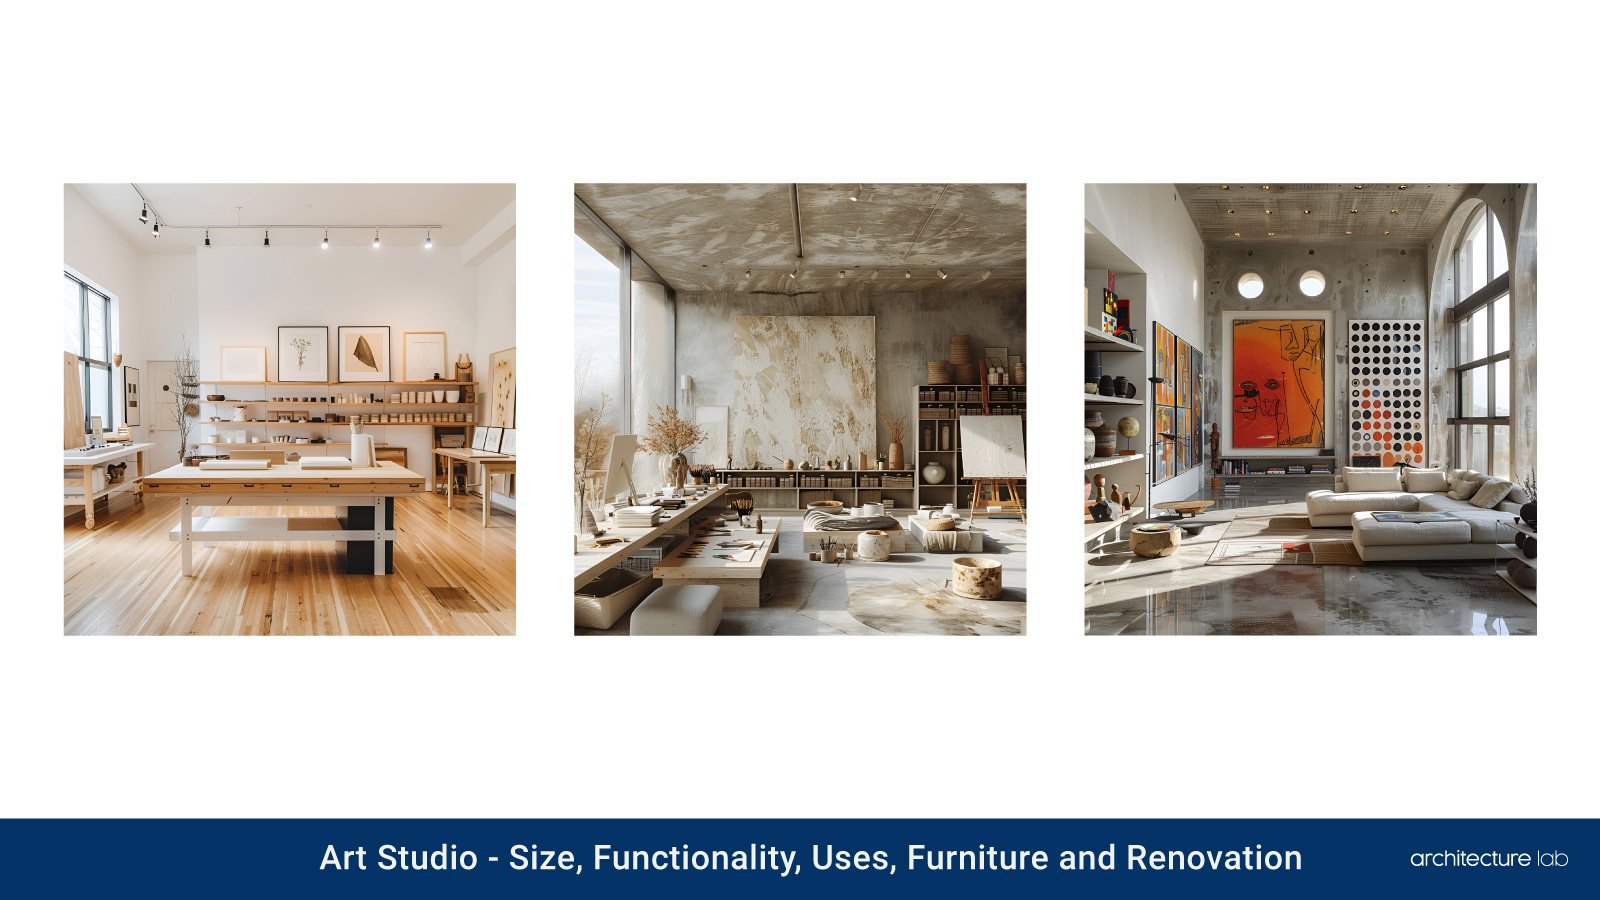 Art studio: size, functionality, uses, furniture, and renovation